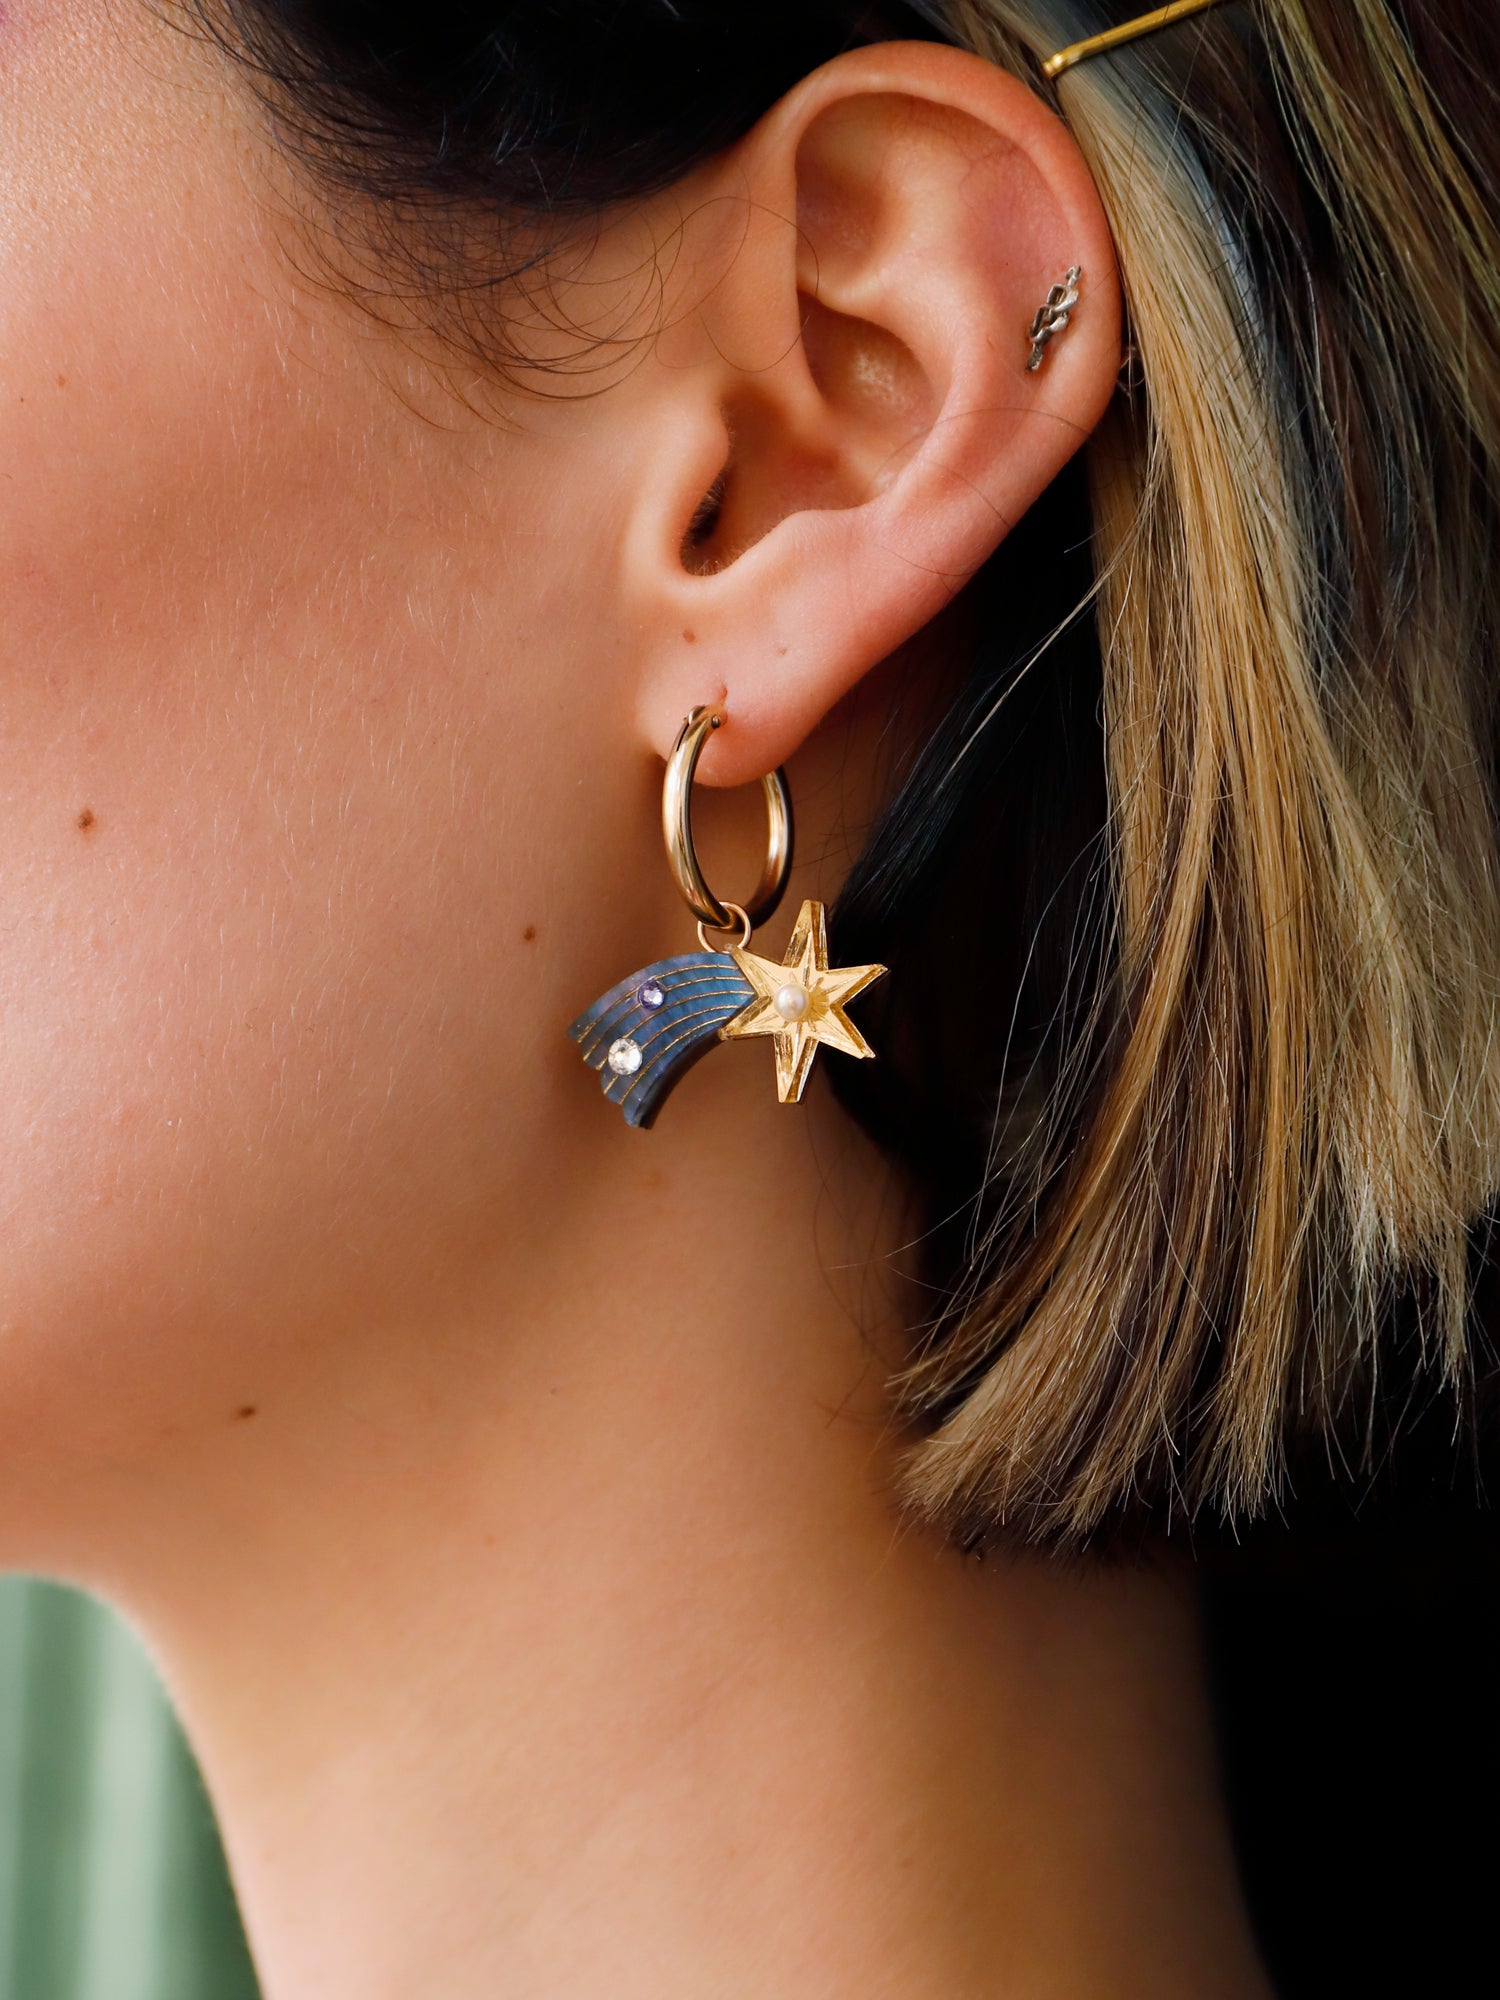 Shooting Star charm hoop earrings made with laser cut deep blue acrylic, Czech glass pearls and hand inked details. Wear with our 14k gold-filled hoops. Handmade in the UK by Wolf & Moon.